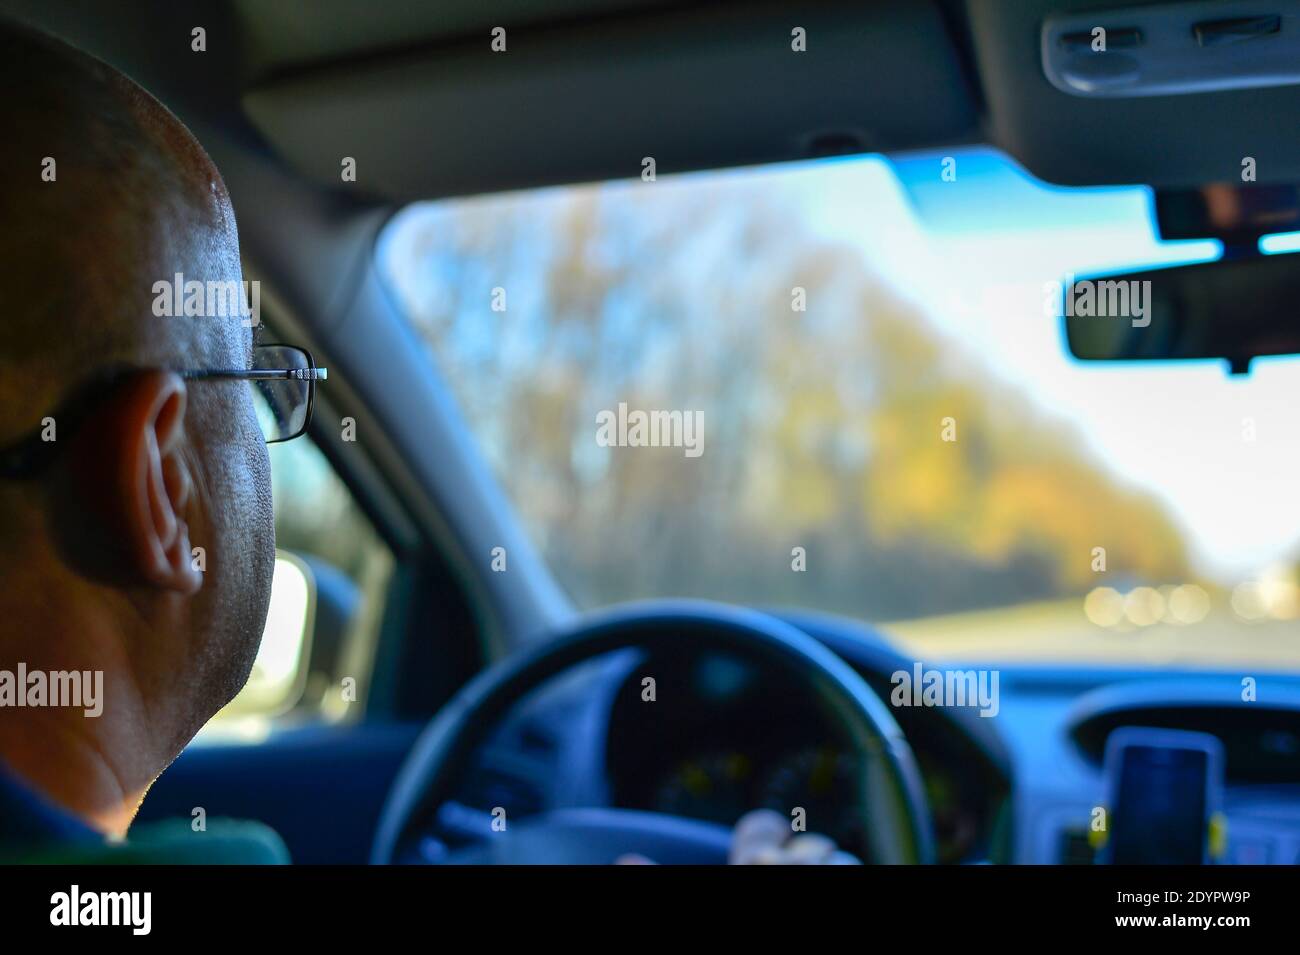 Elderly man with glasses driving a car while driving rear view Russia, Kursk region, Zheleznogorsk, October2016. Selective focus on the driver's glass Stock Photo